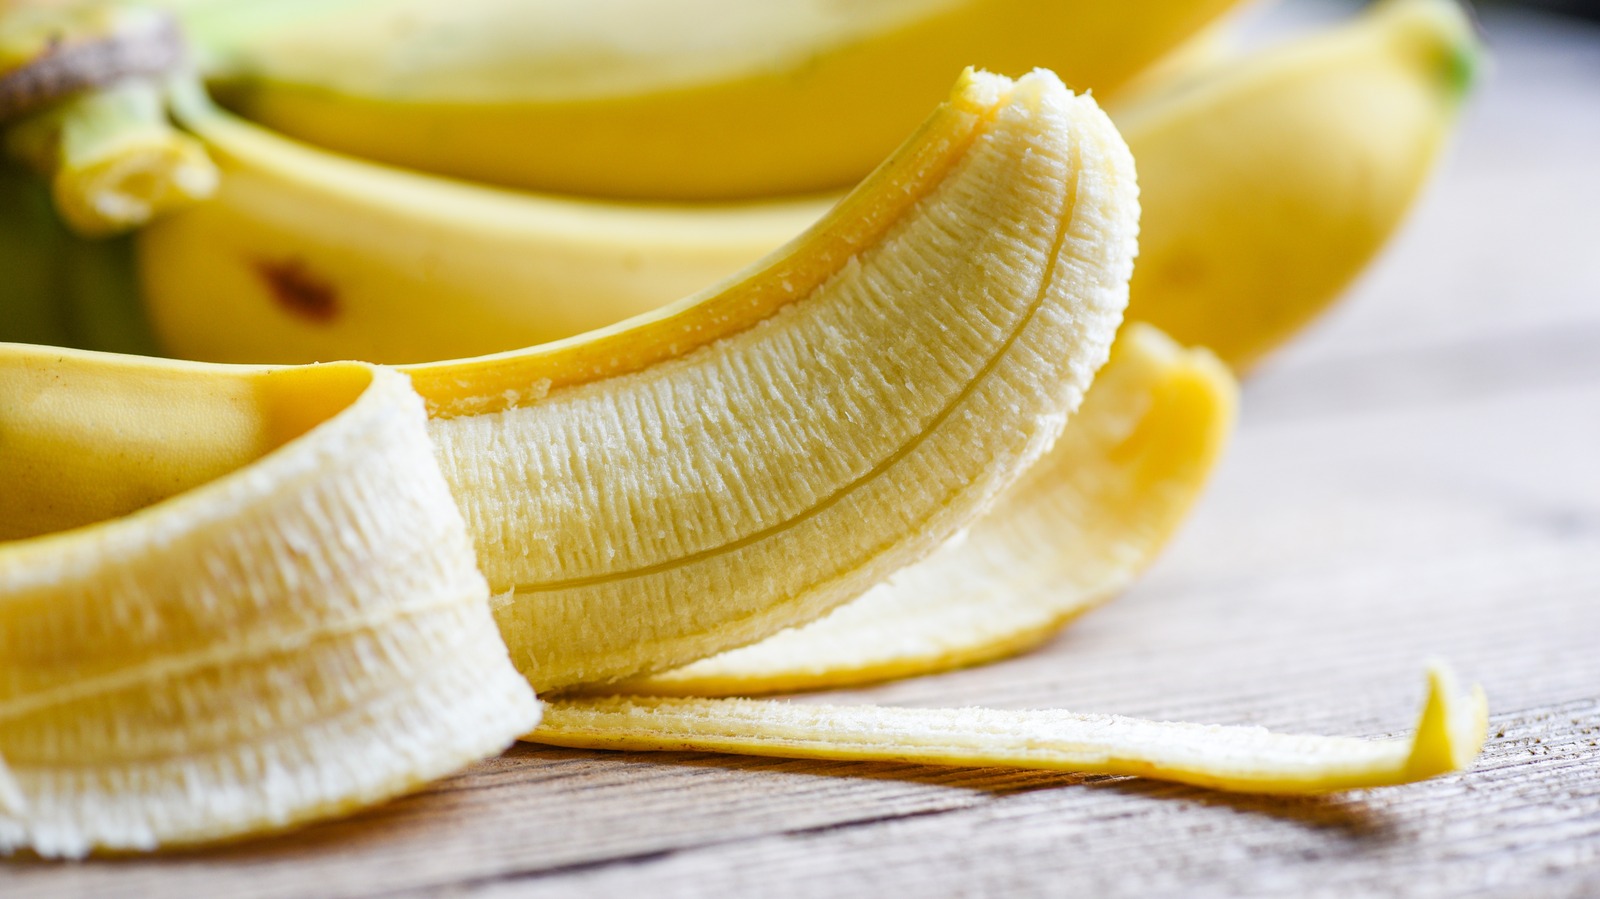 How To Store A Banana After Peeling